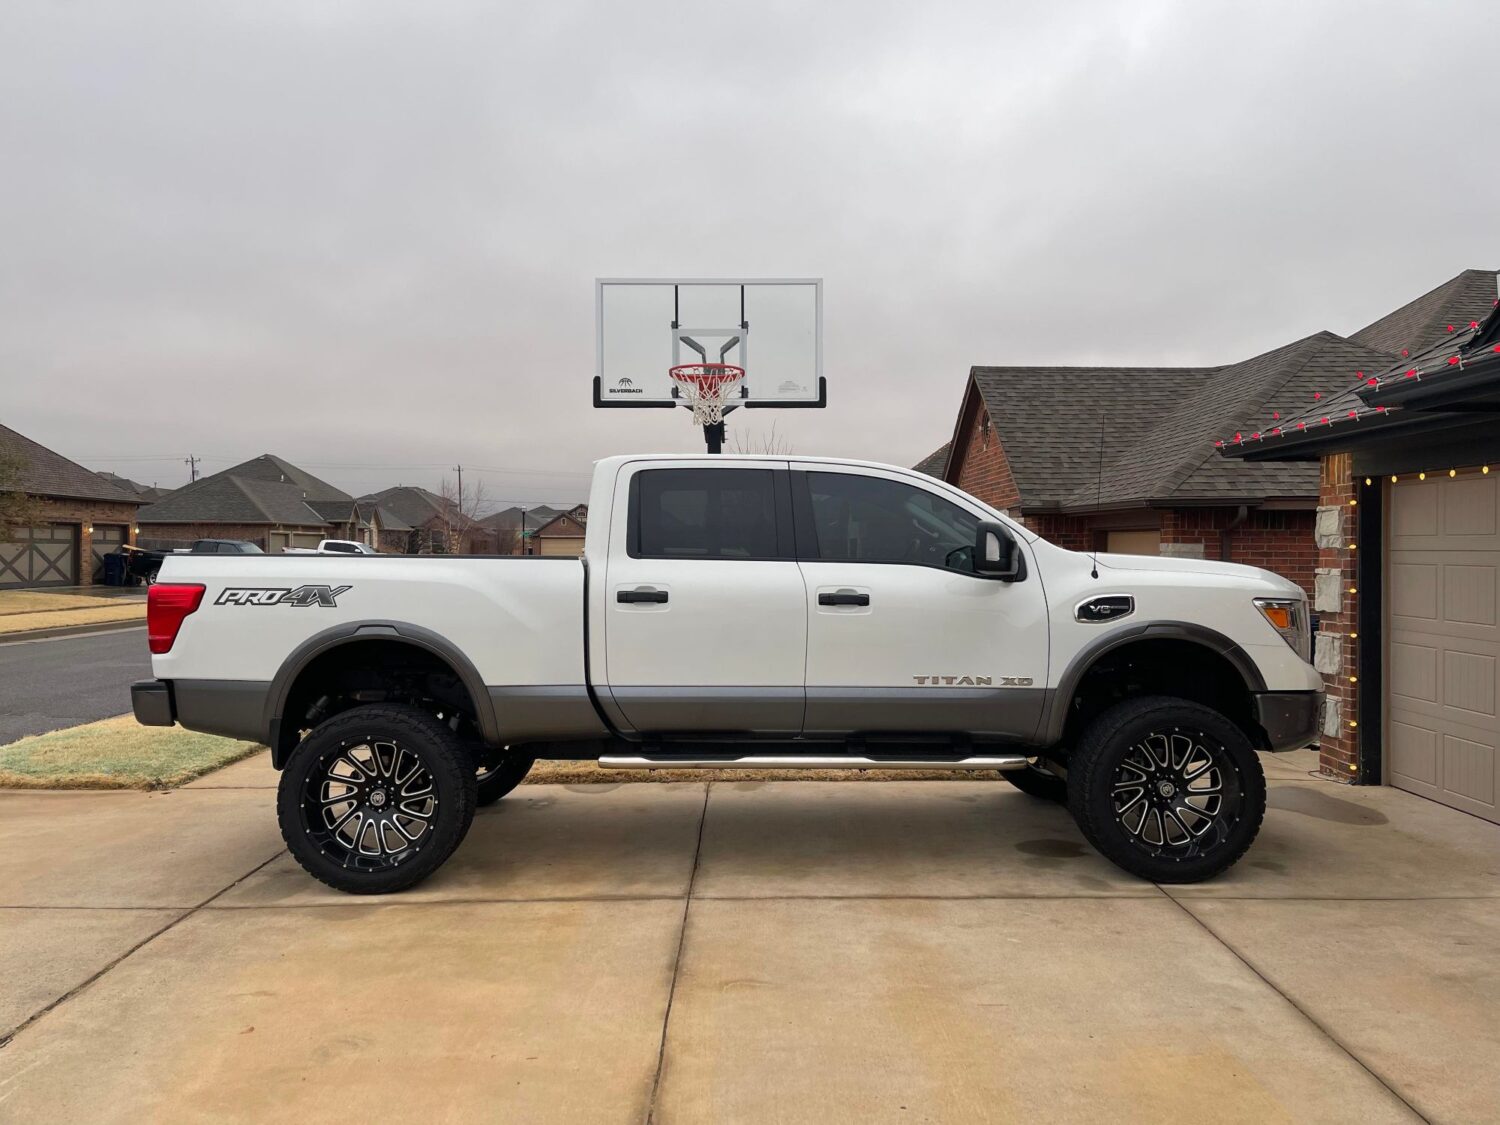 Nissan Titan with 24×12-inch Hardcore Off-Road HC15